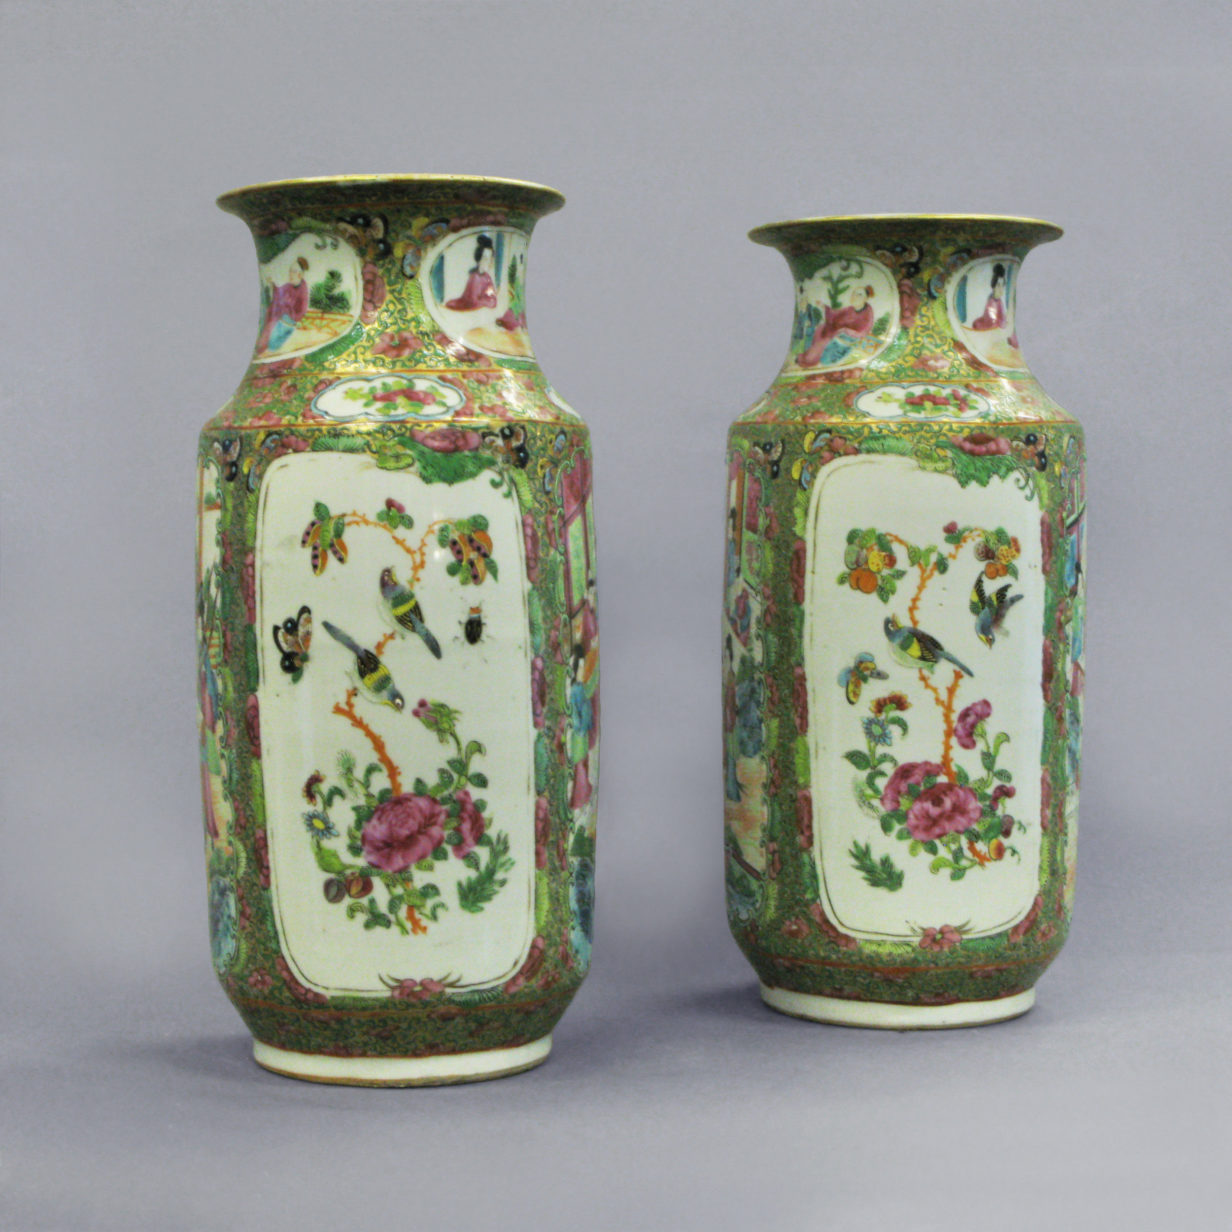 A Pair of Qing Dynasty Canton Vases as Lamp Bases